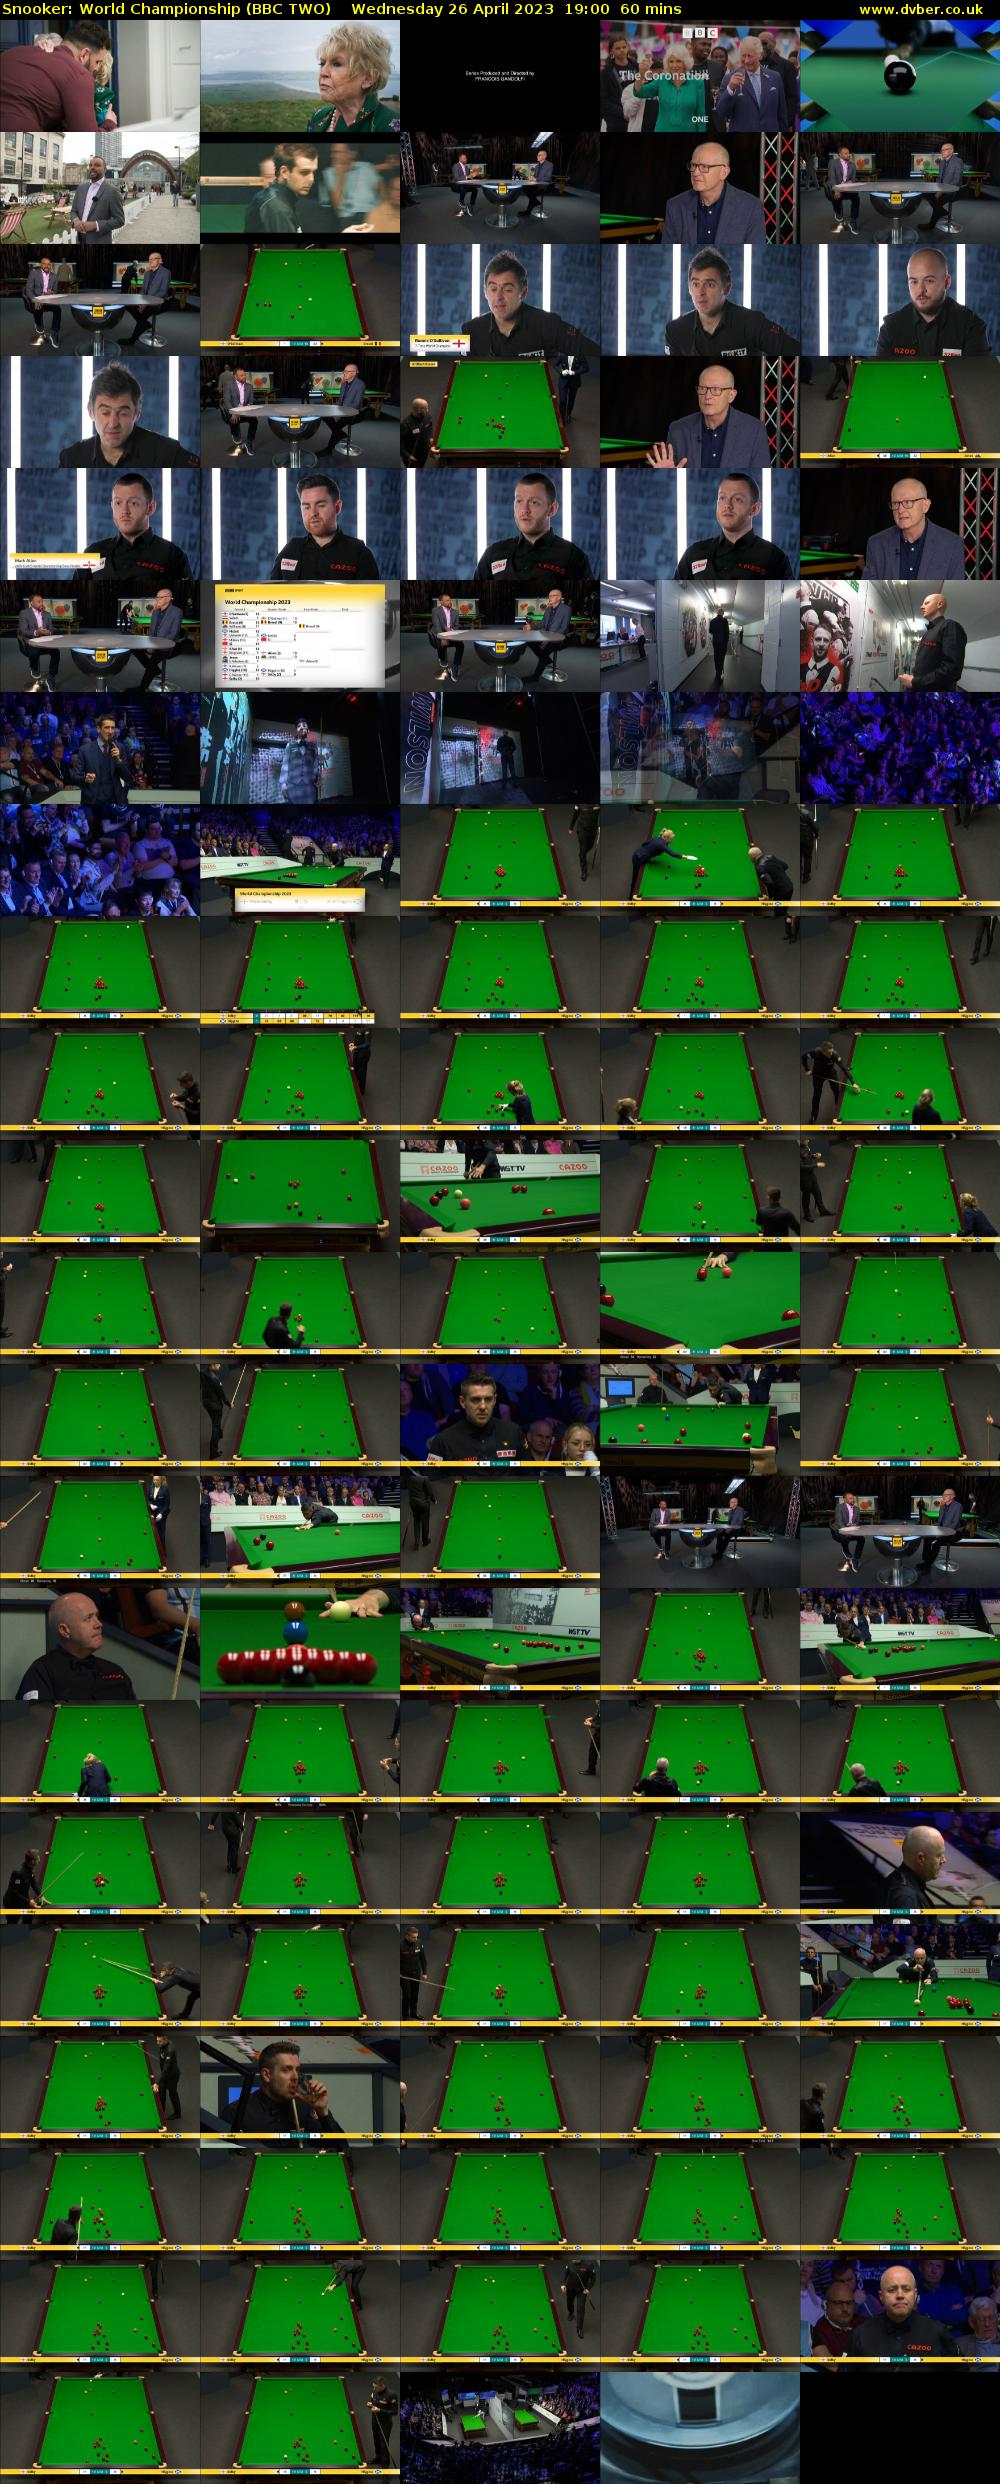 Snooker: World Championship (BBC TWO) Wednesday 26 April 2023 19:00 - 20:00